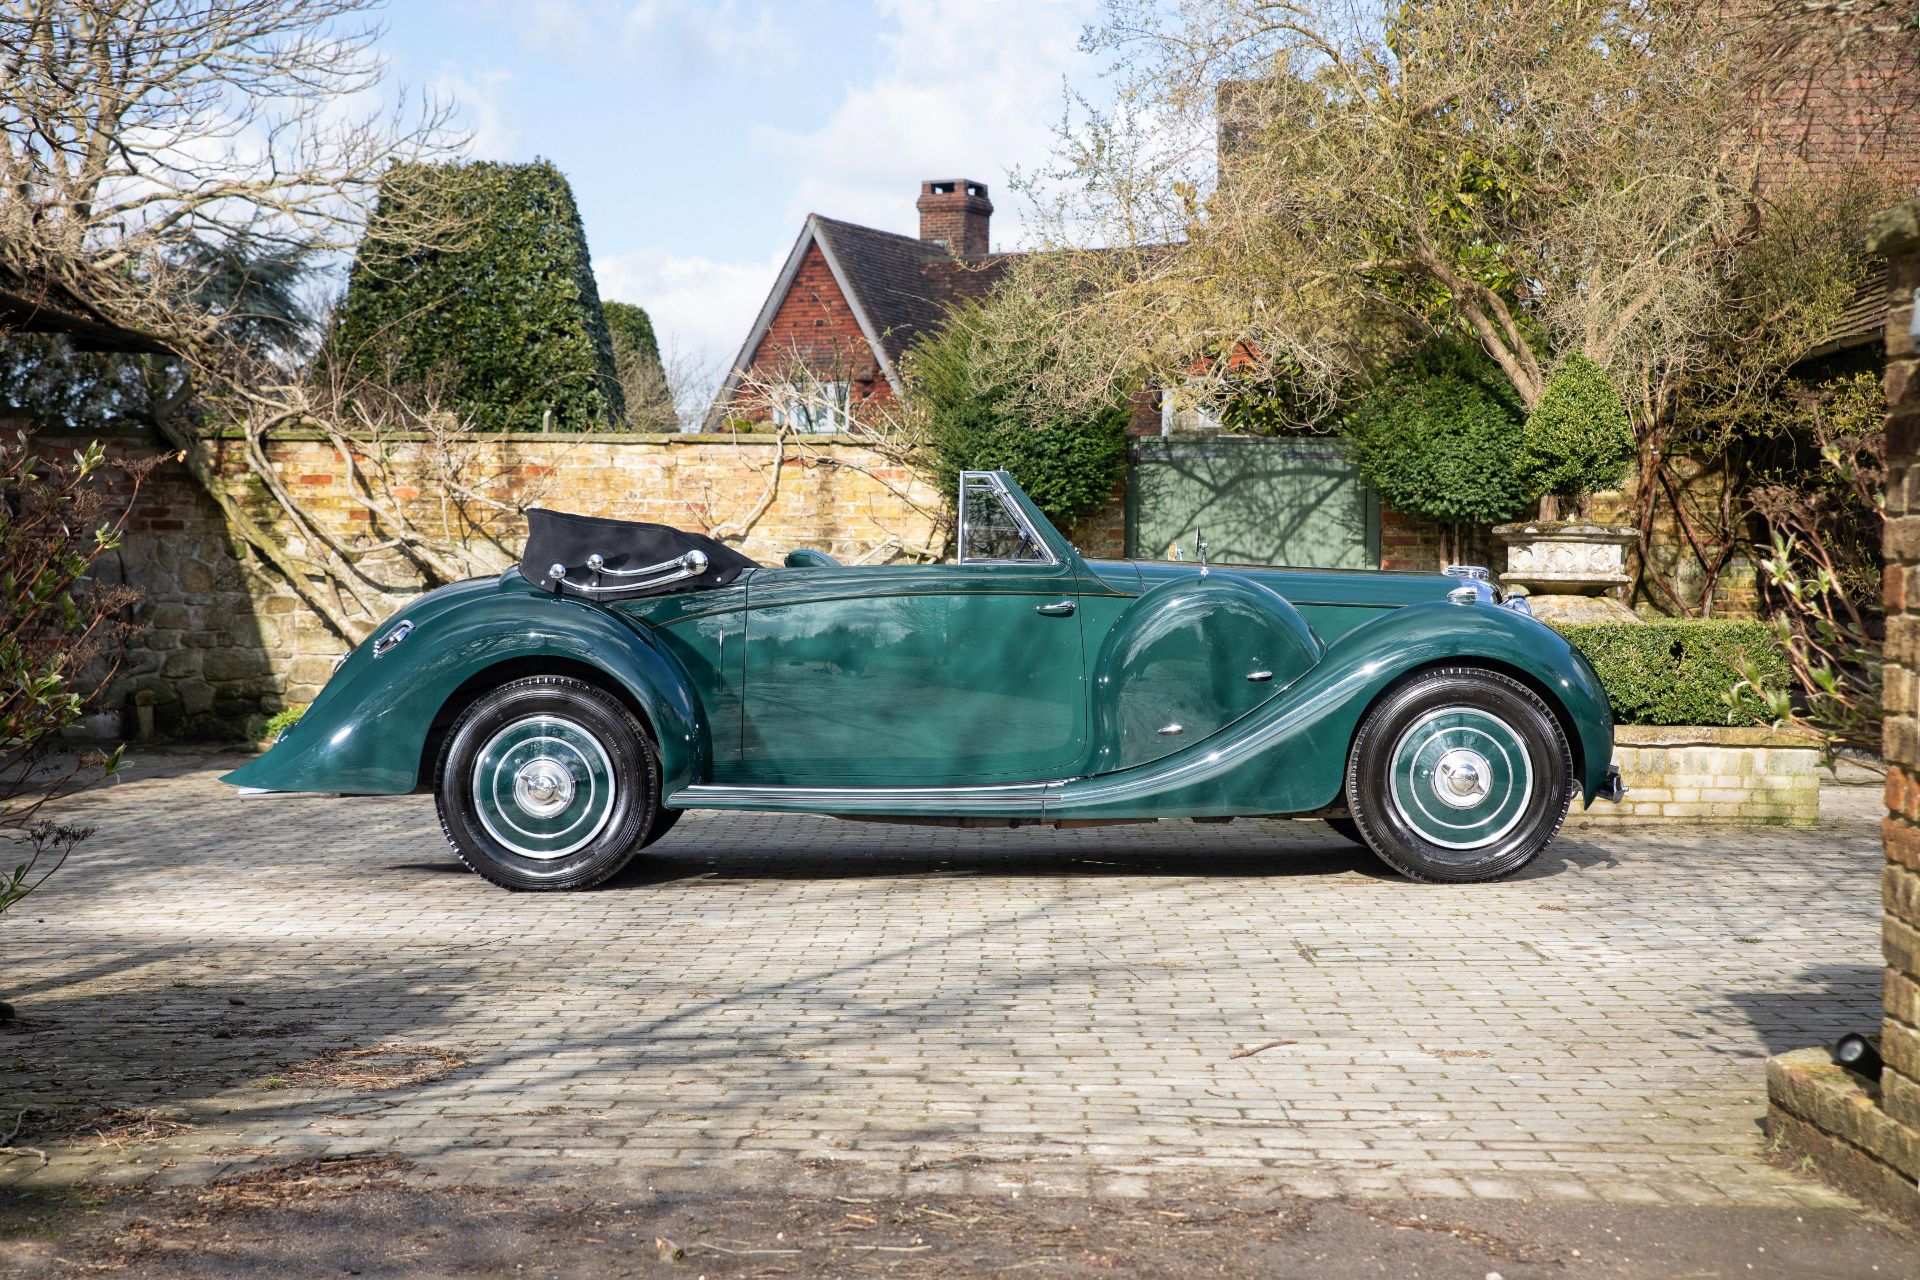 Offered from the estate of the late Michael Patrick Aiken, MBE,1939 Lagonda V12 Drophead Coupé C... - Bild 38 aus 64